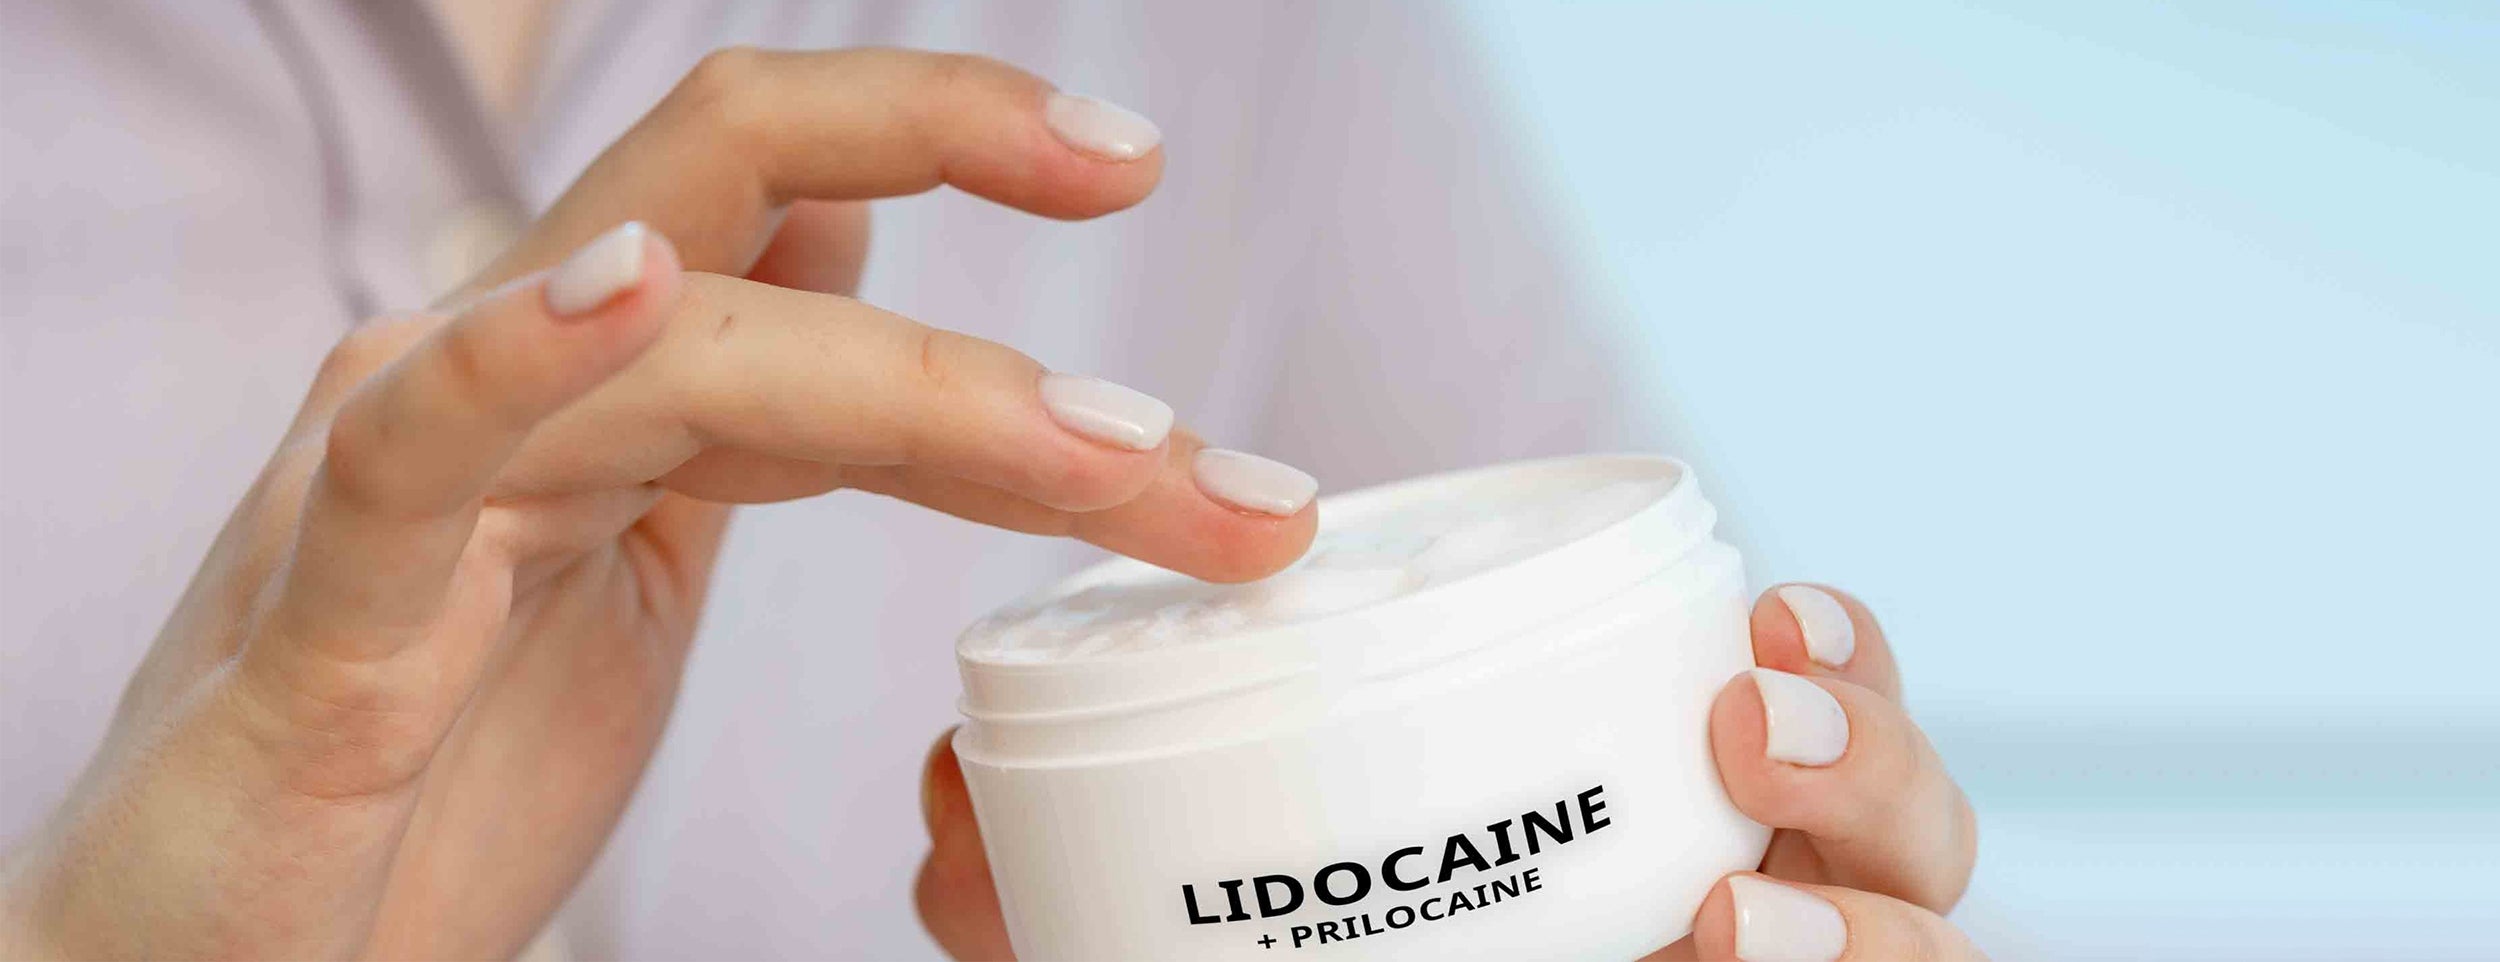 Safety of lidocaine in hemorrhoids